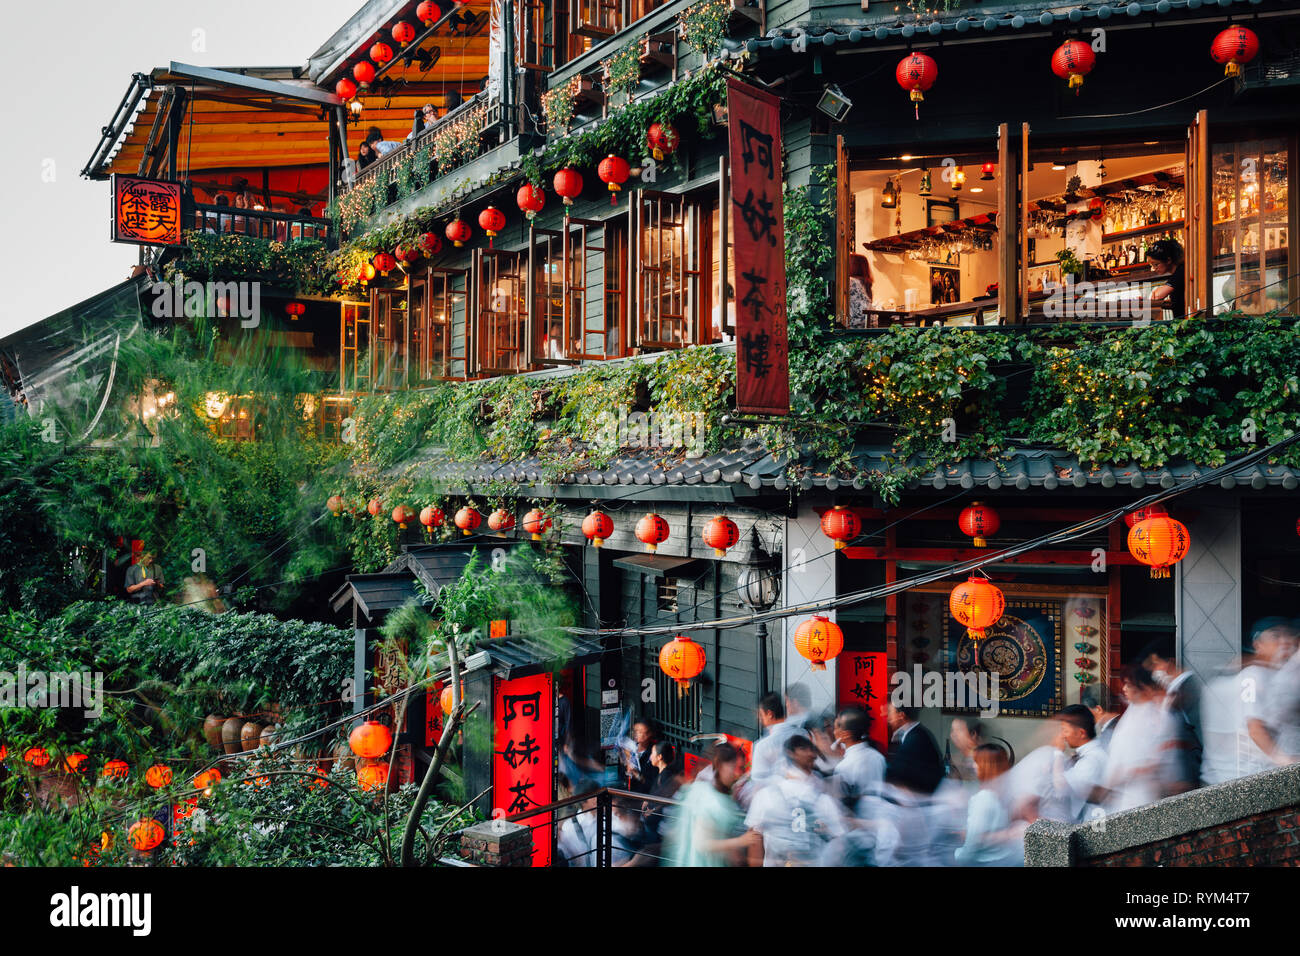 Jiufen, Taiwan - November 7, 2018: Tourists walk through the famous stair in front of the old teahouse decorated with Chinese lanterns, Jiufen Old Str Stock Photo